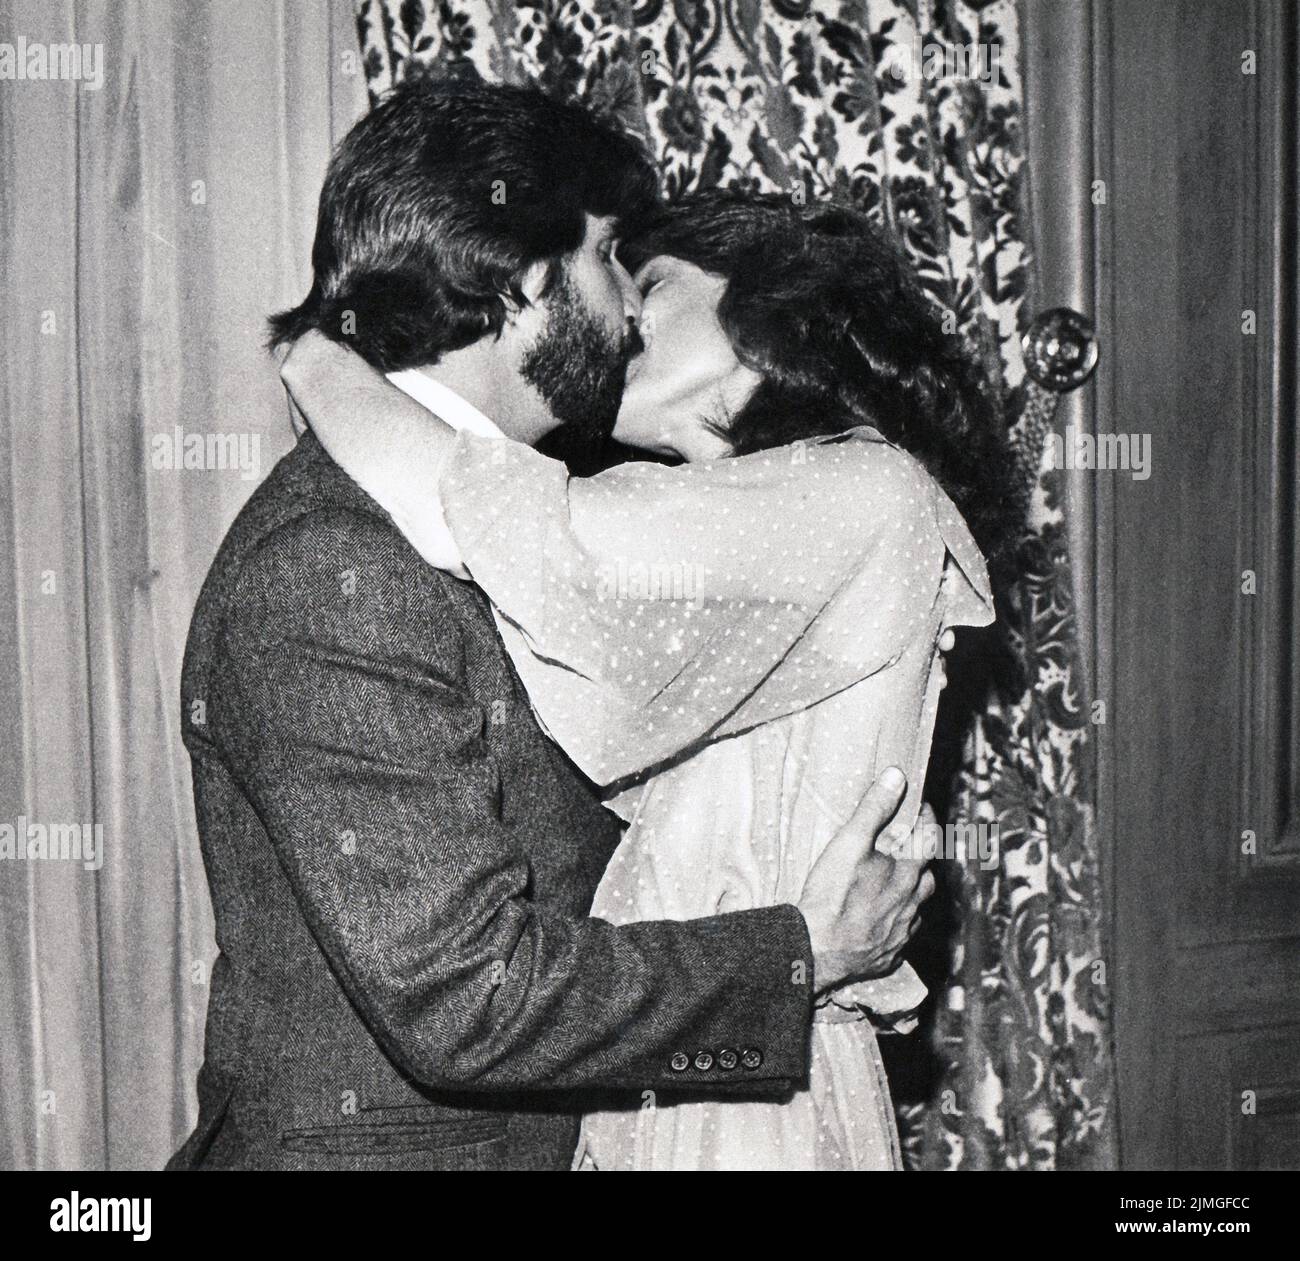 TV star Henry Winkler kisses his new wife, Stacey Weitzman. At a photo call in a hotel in Midtown Manhattan shortly after their May 5, 1978 wedding. Stock Photo